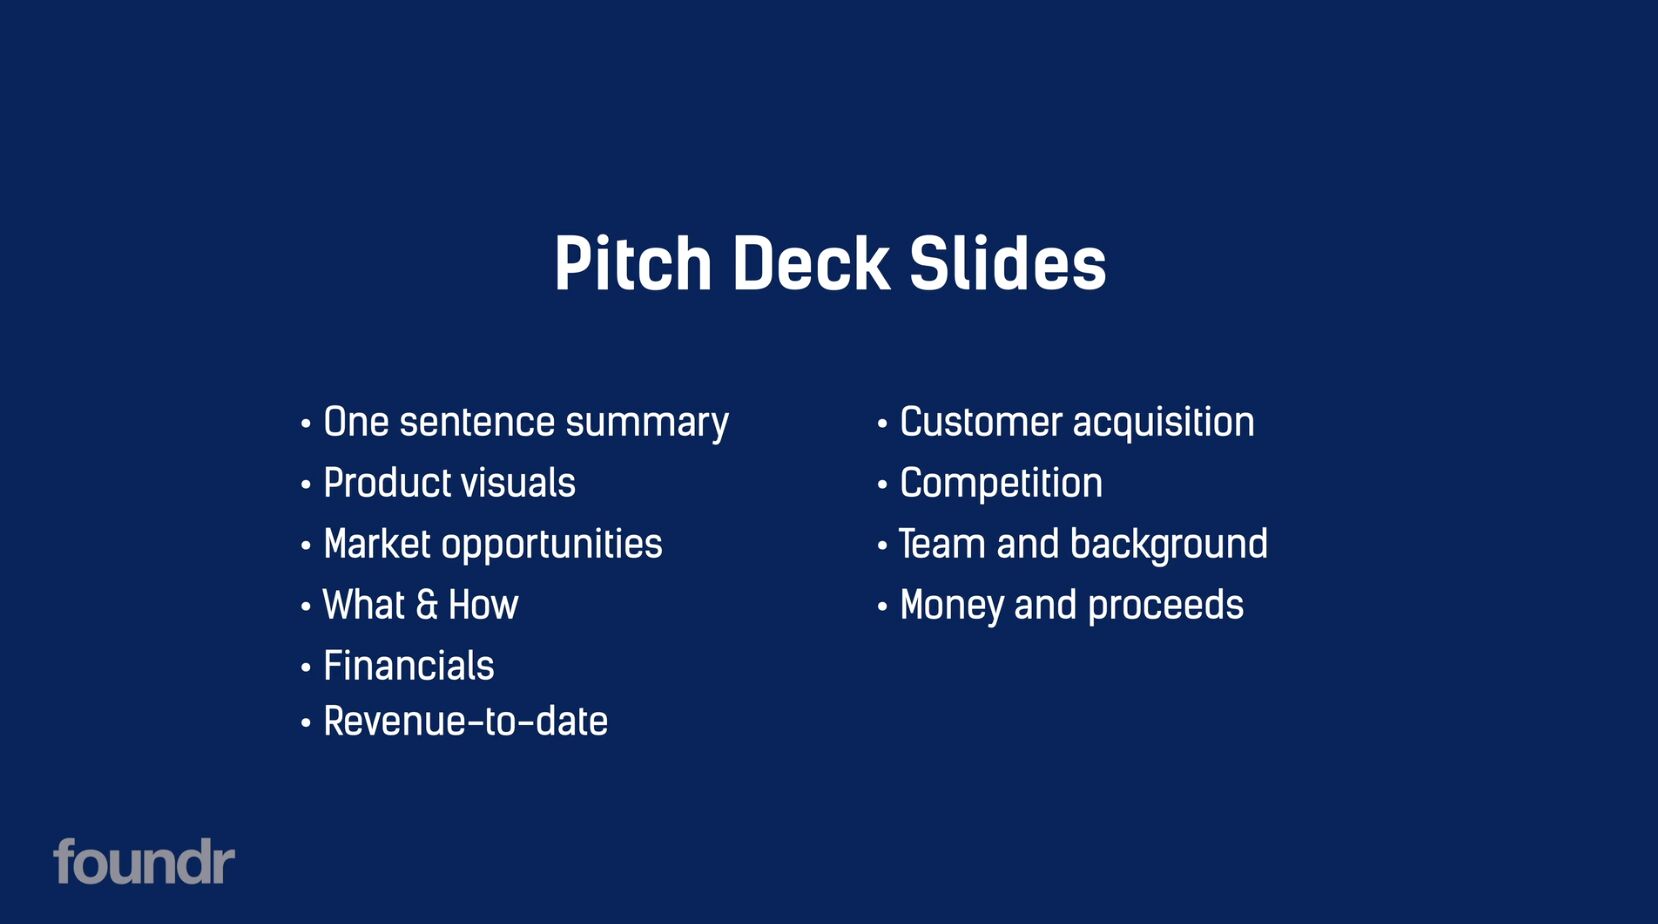 Pitch deck slides - How To Develop a Million-Dollar Pitch Deck For Potential Investors